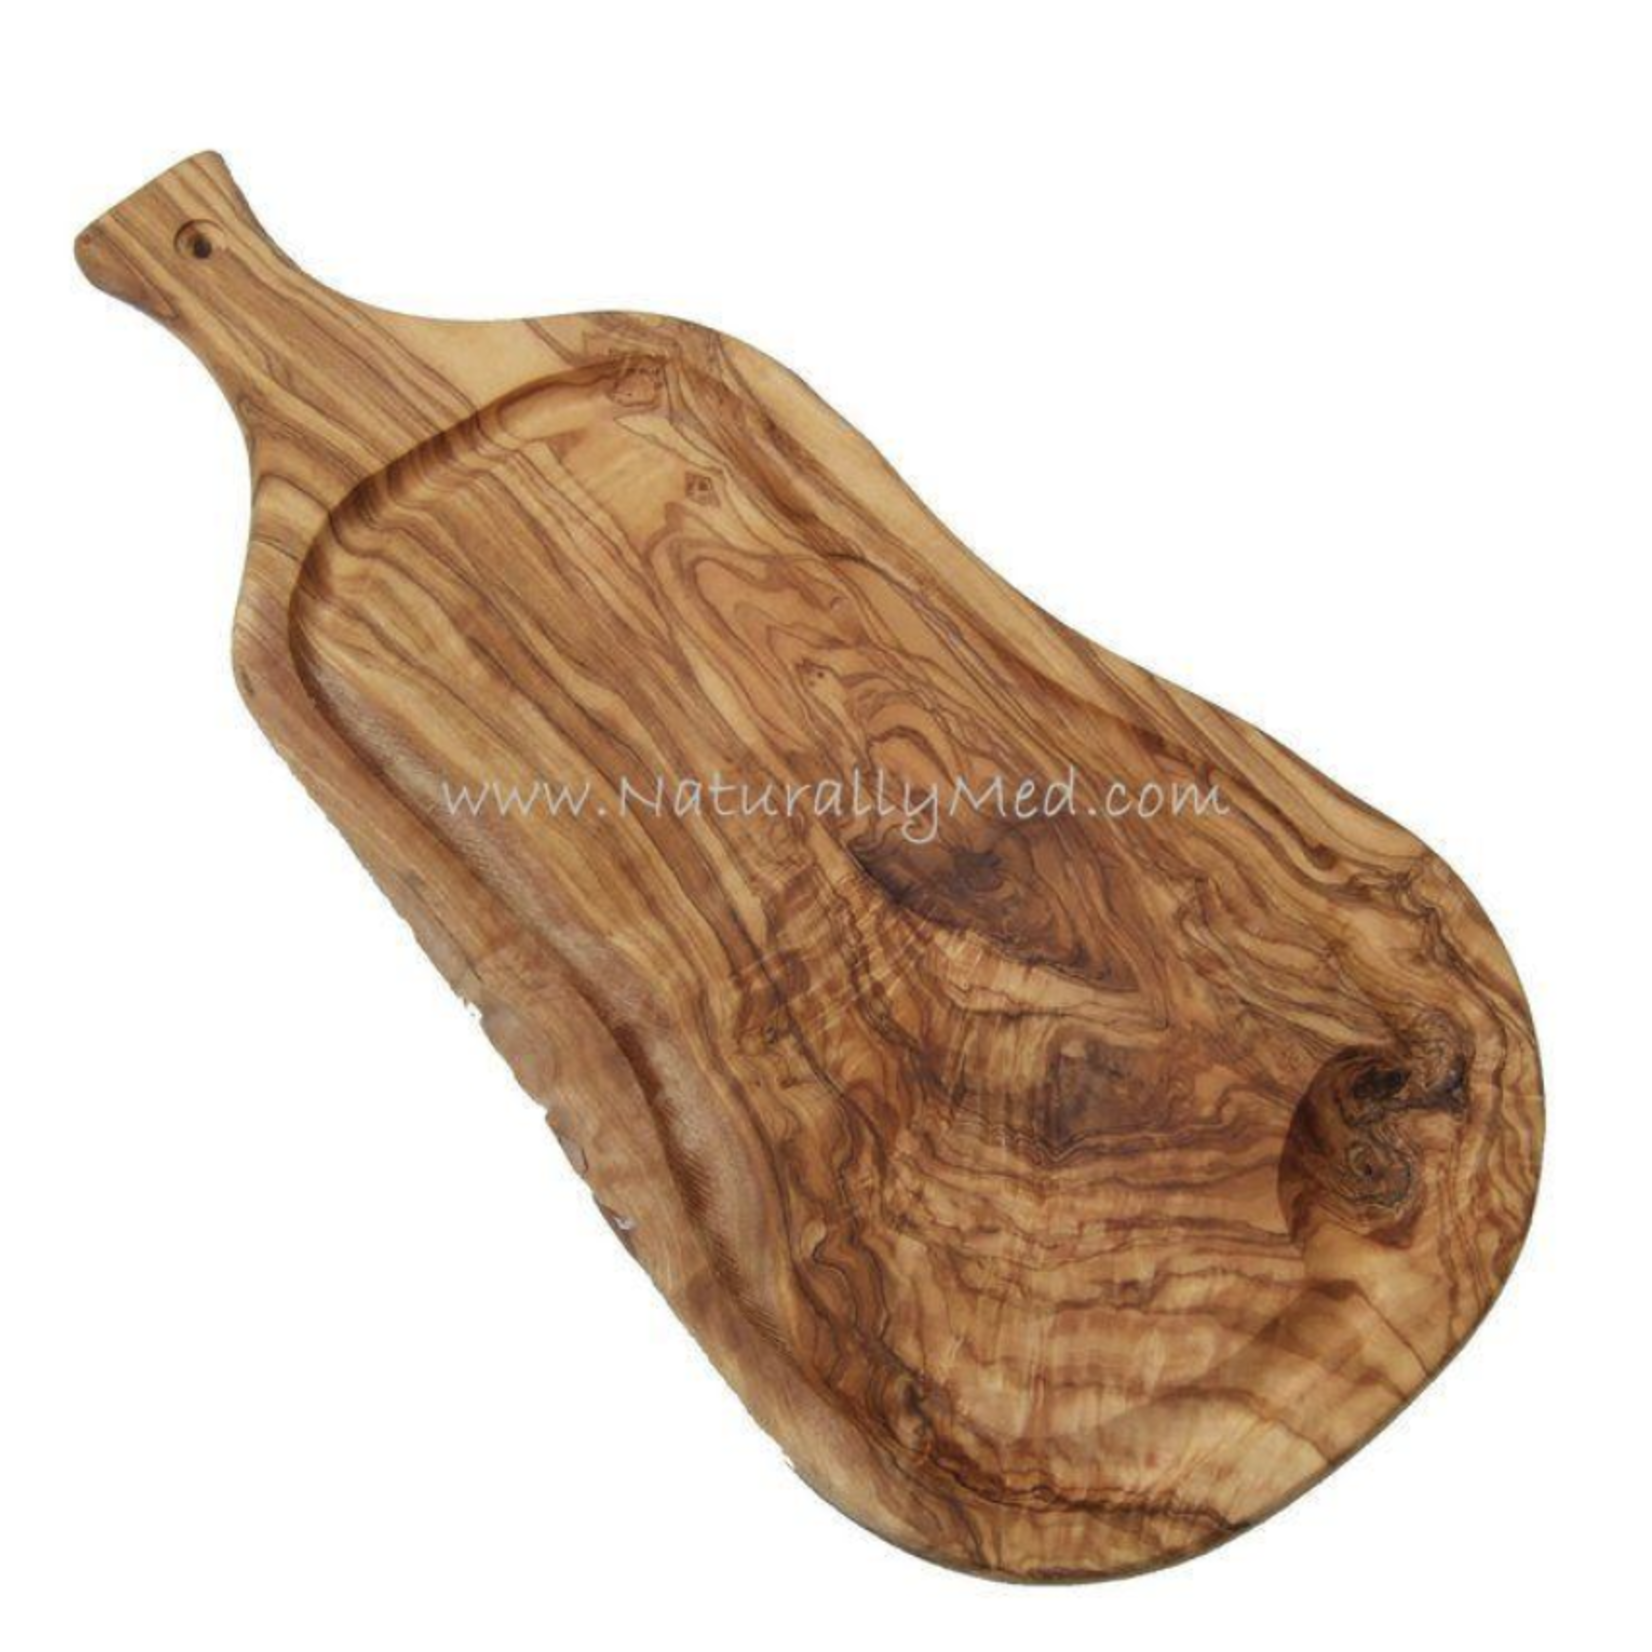 Naturally Med Olive Wood Carving Board / Steak Board, with Handle - 19.5"